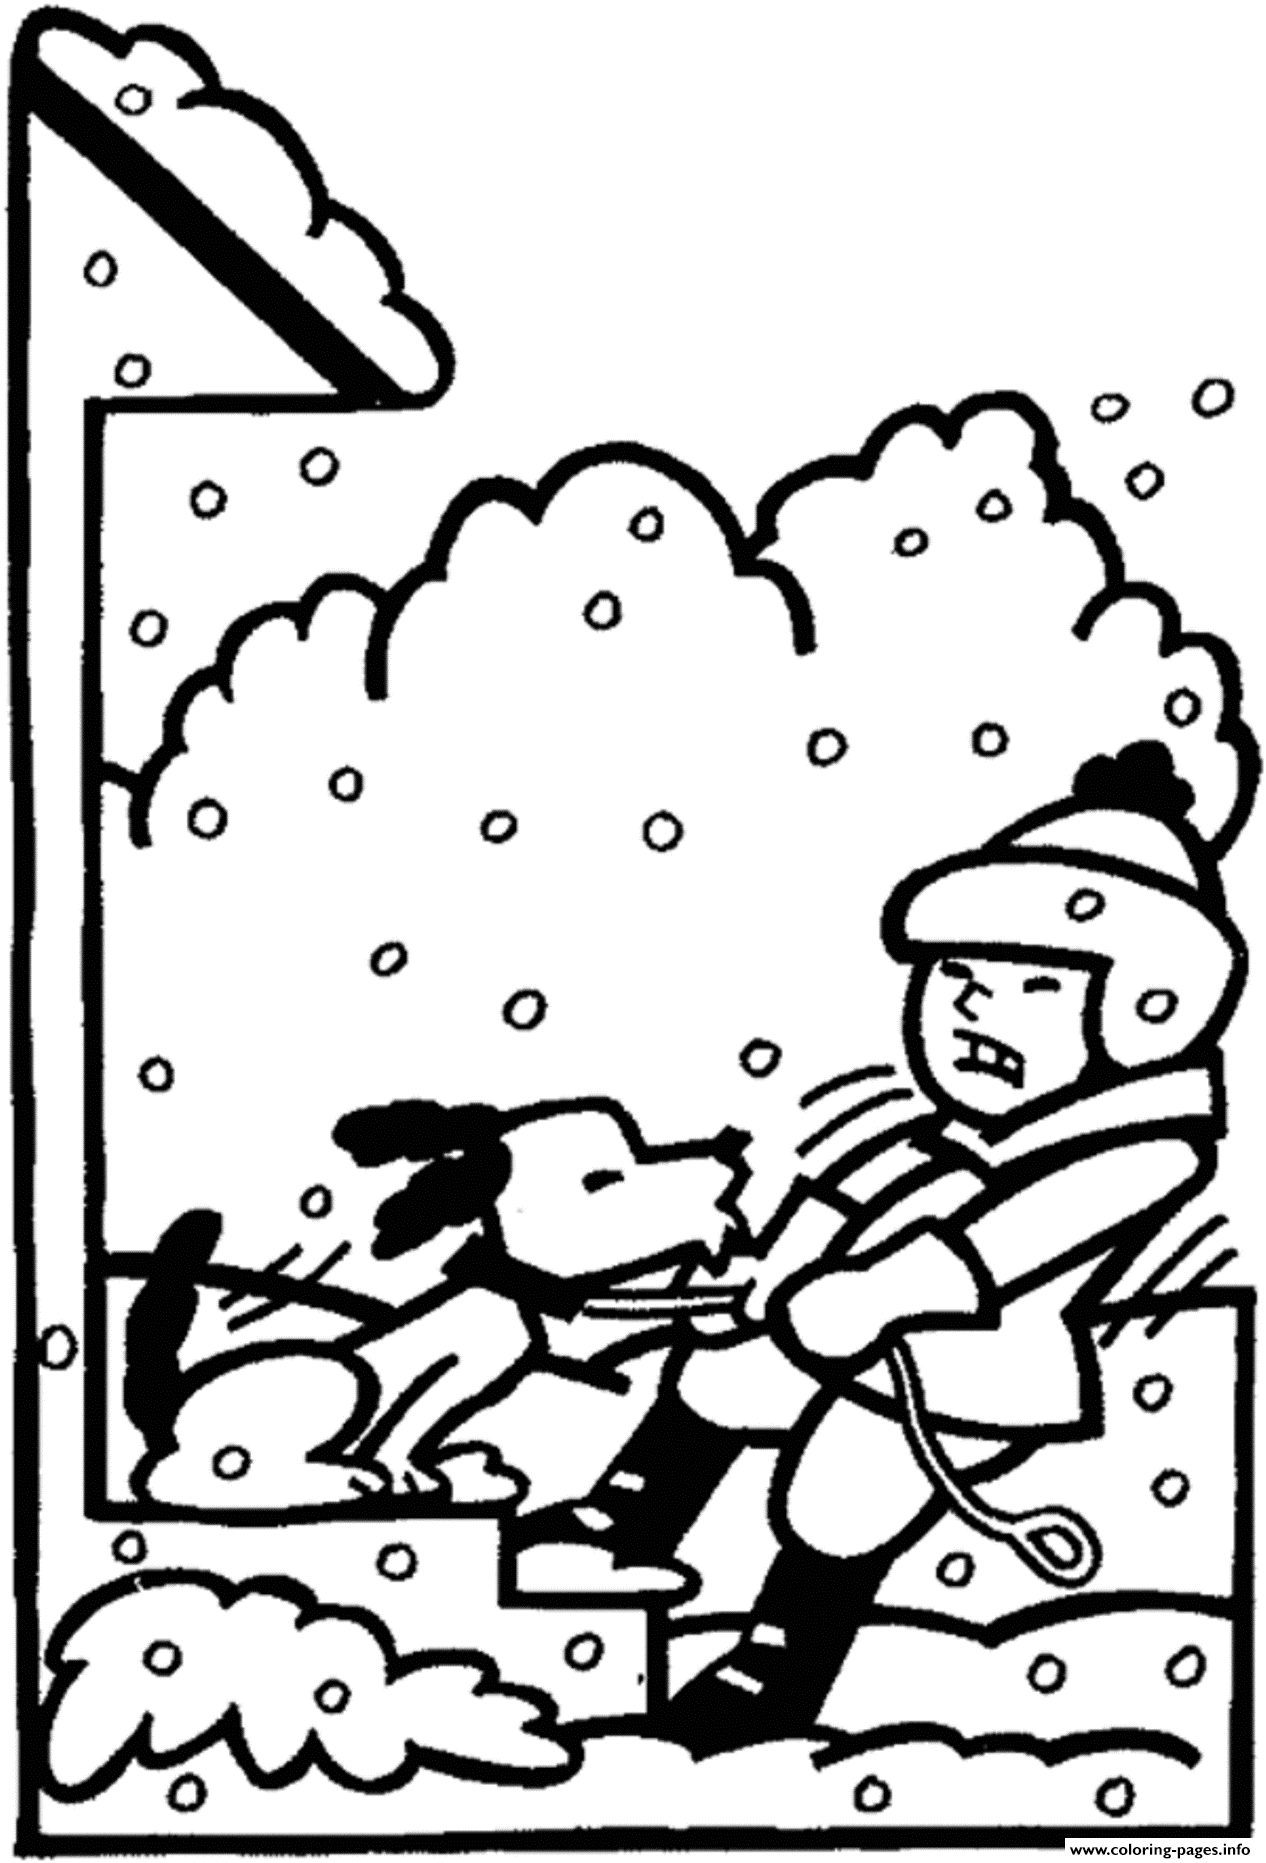 Kid And Dog Winter S2391 coloring